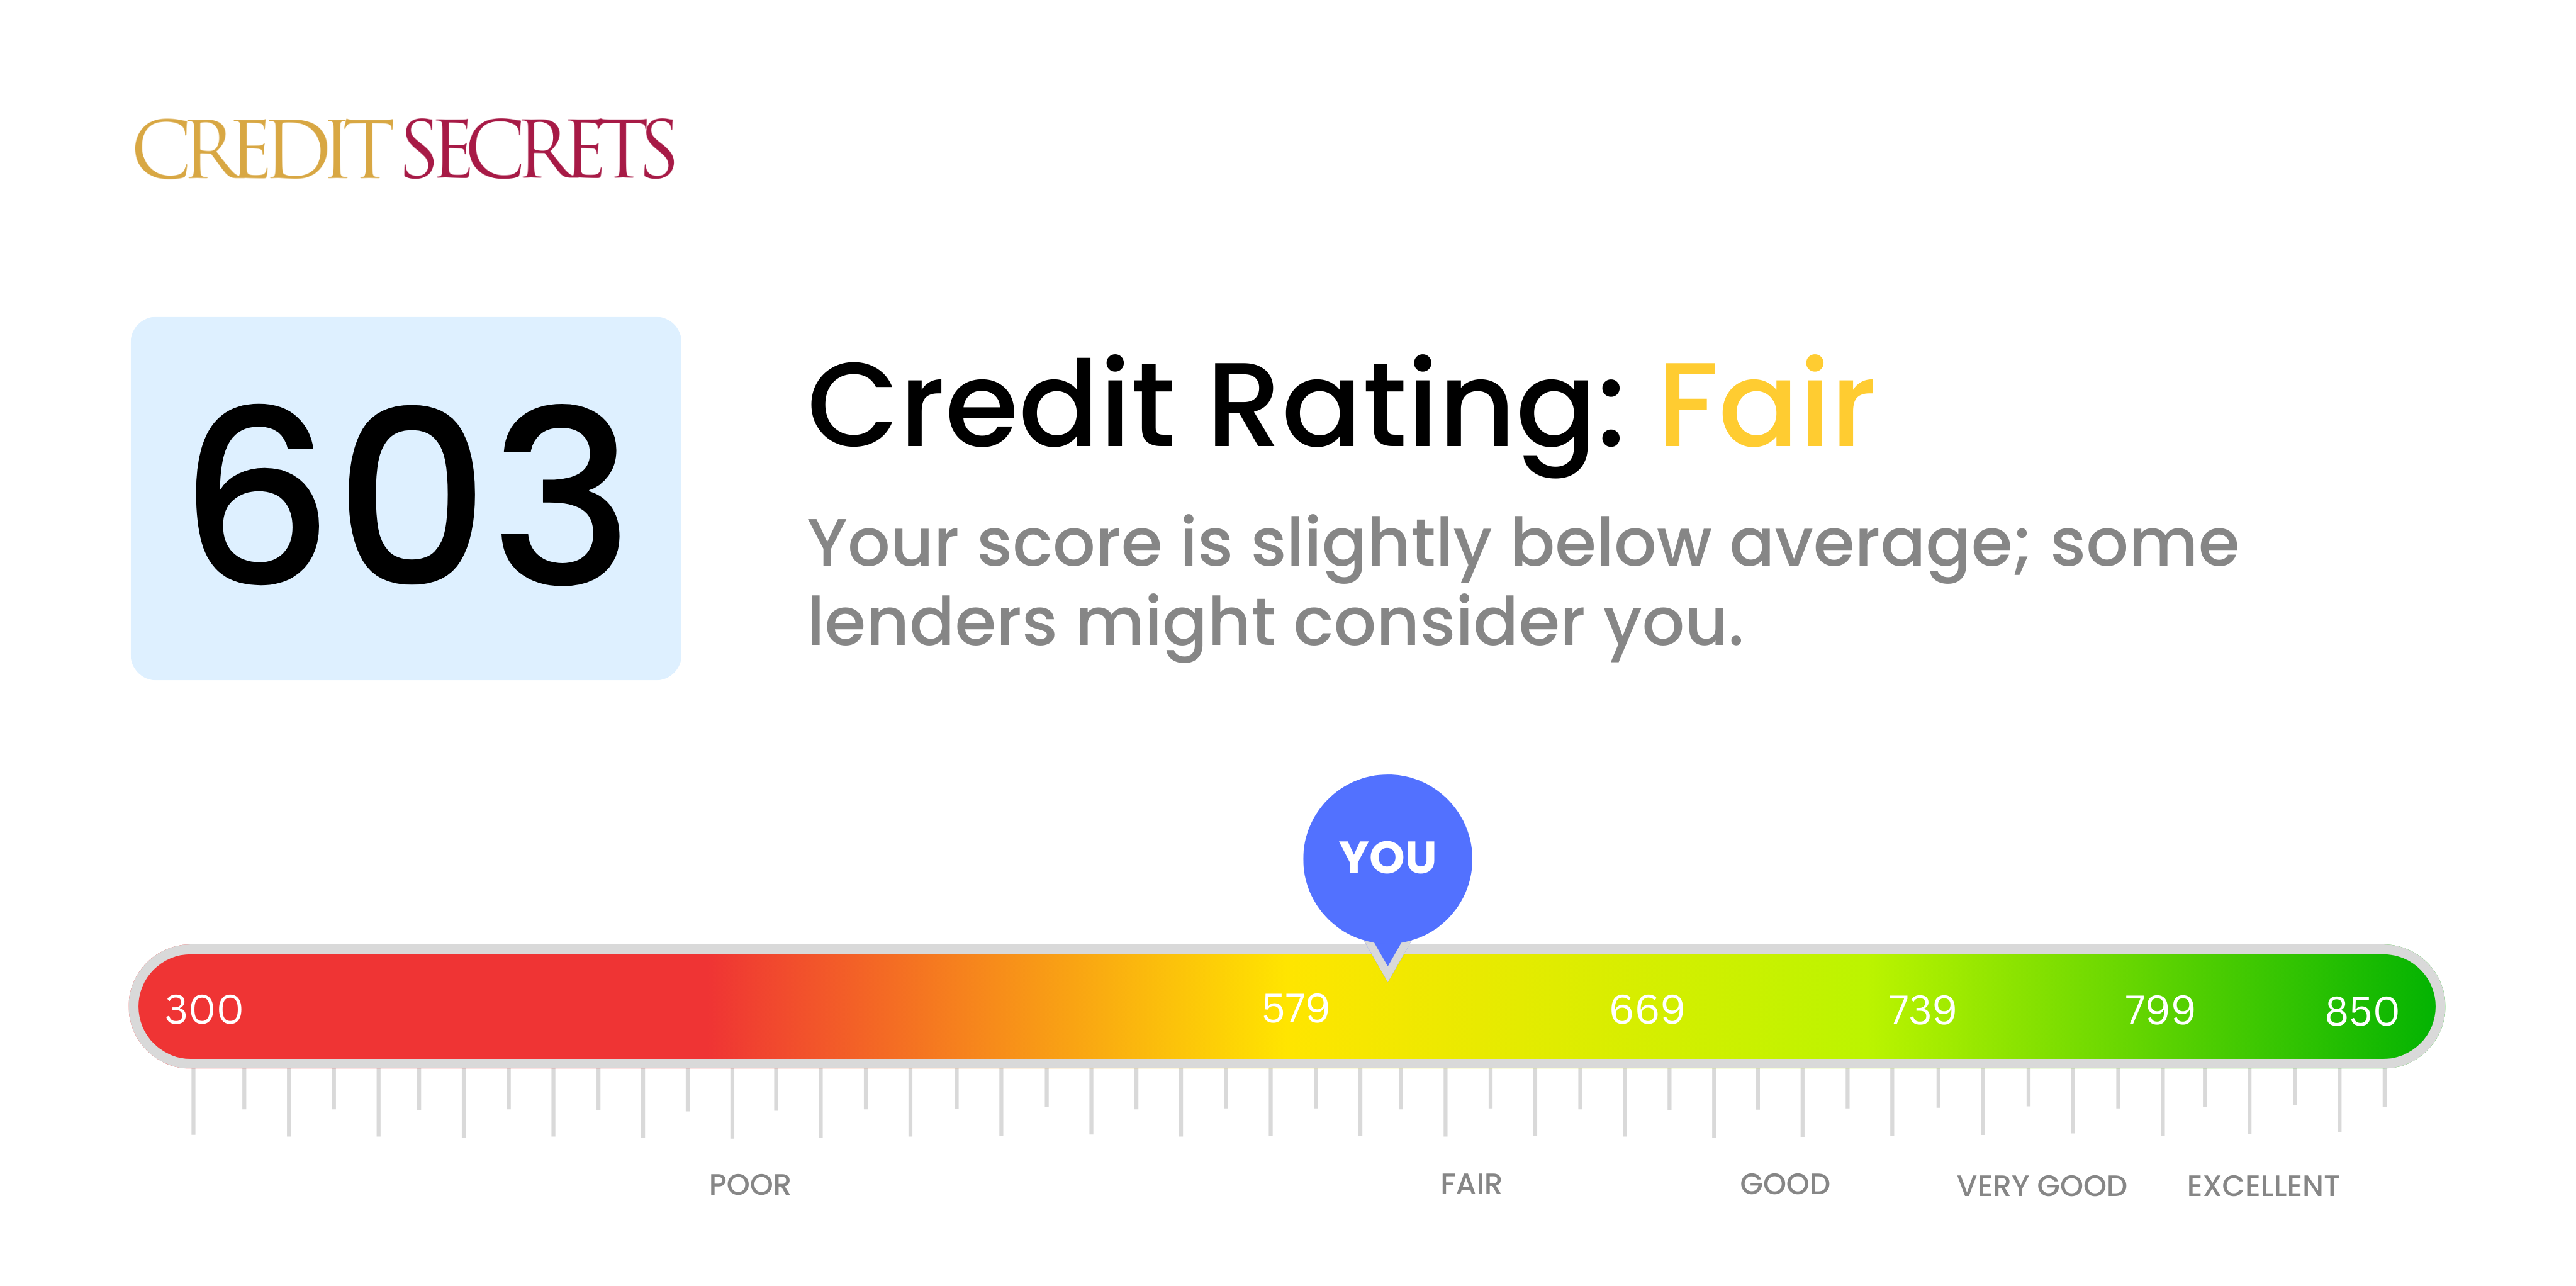 Is 603 a good credit score?